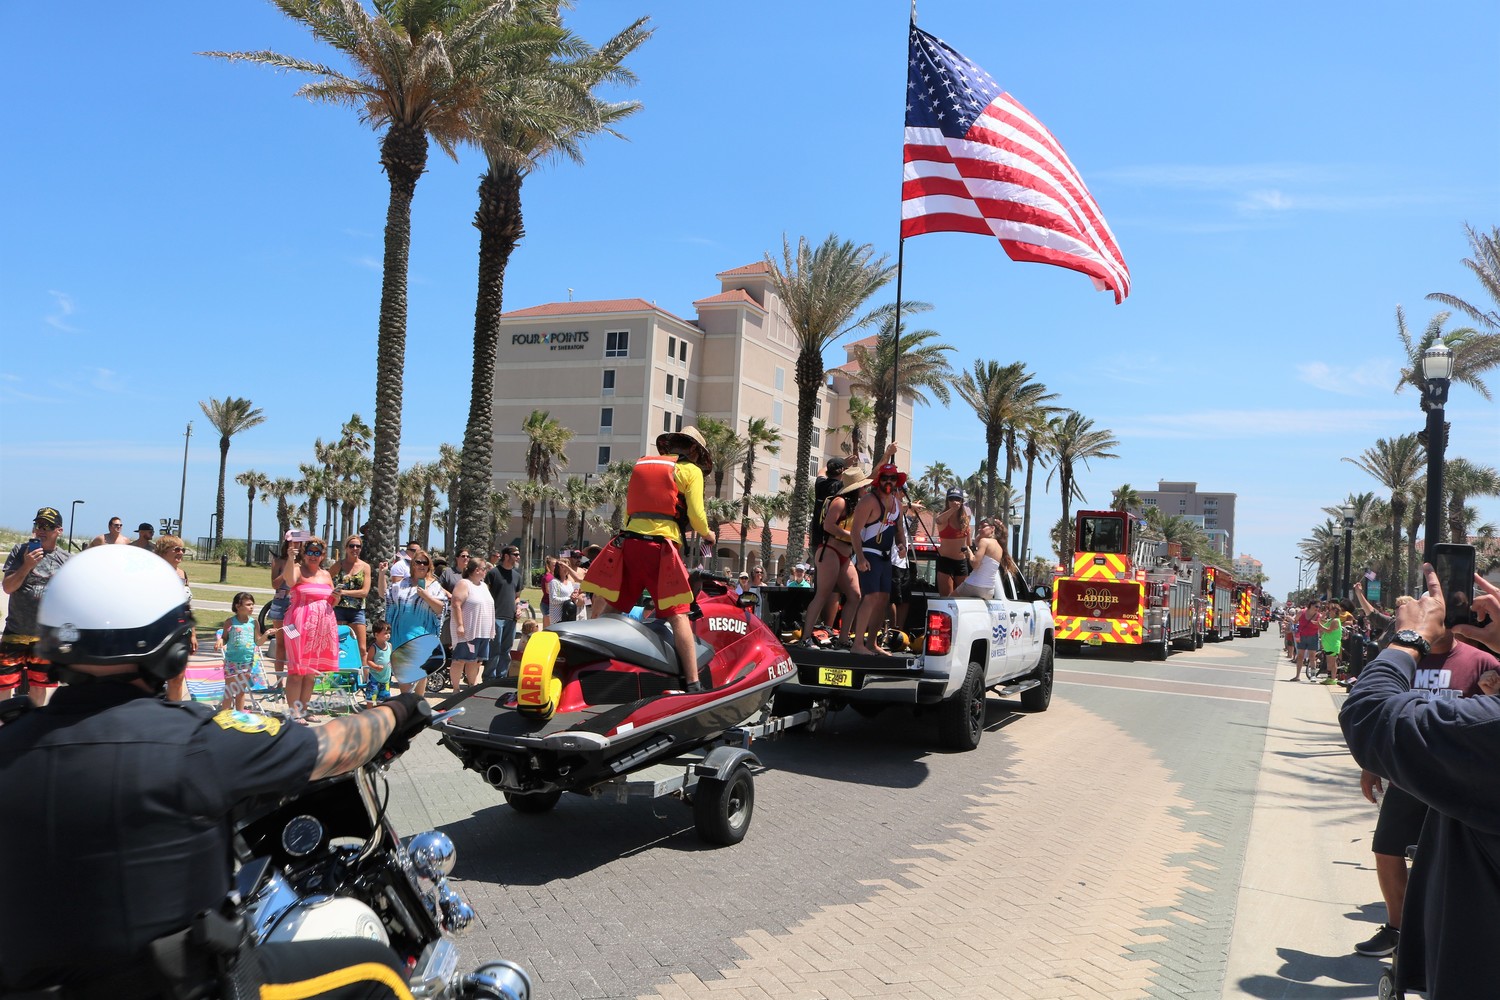 Beaches declared open with annual parade and fanfare The Ponte Vedra